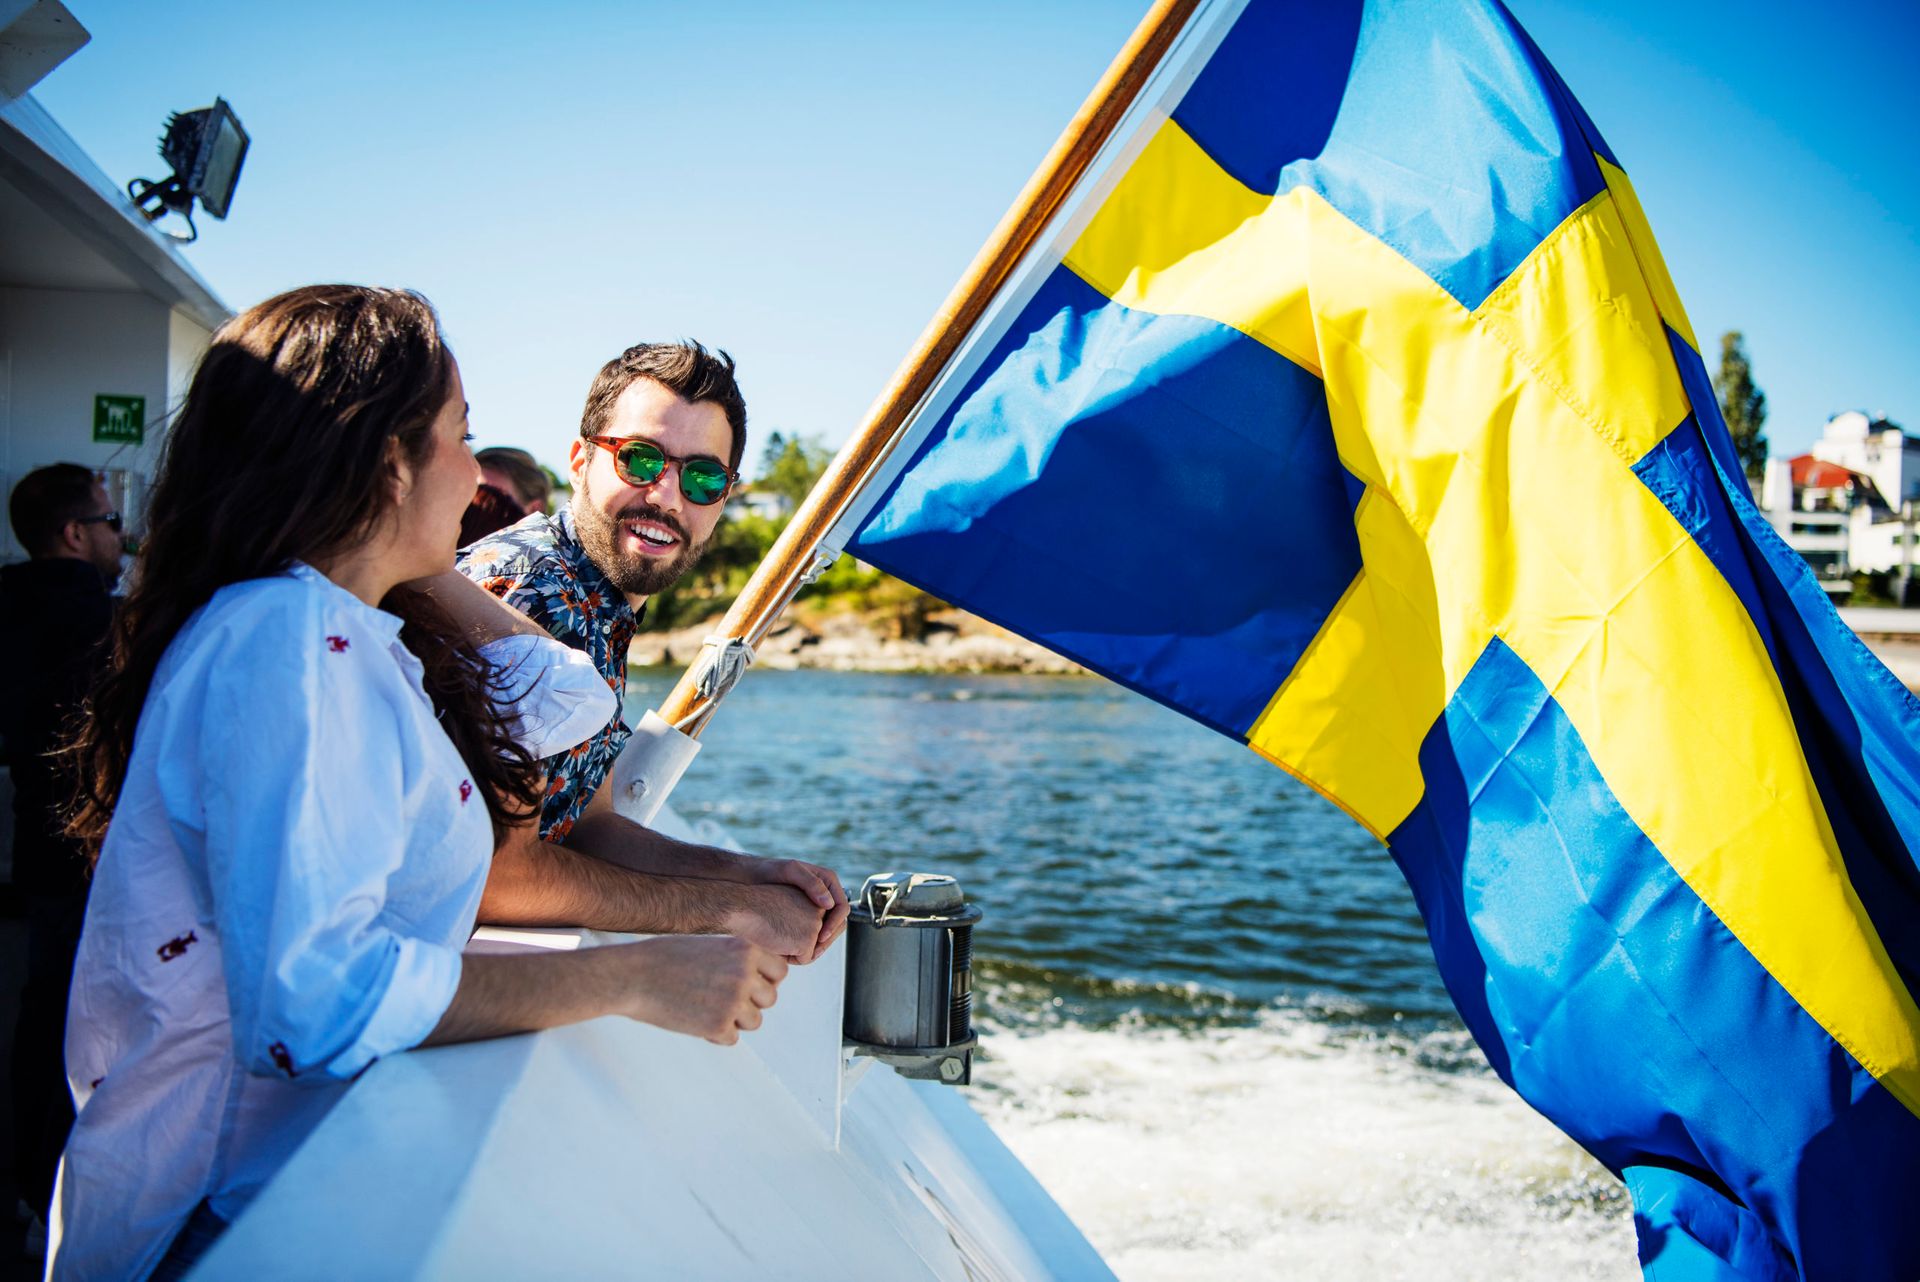 Friends by the water during summer time on a boat ride with the Swedish flag.